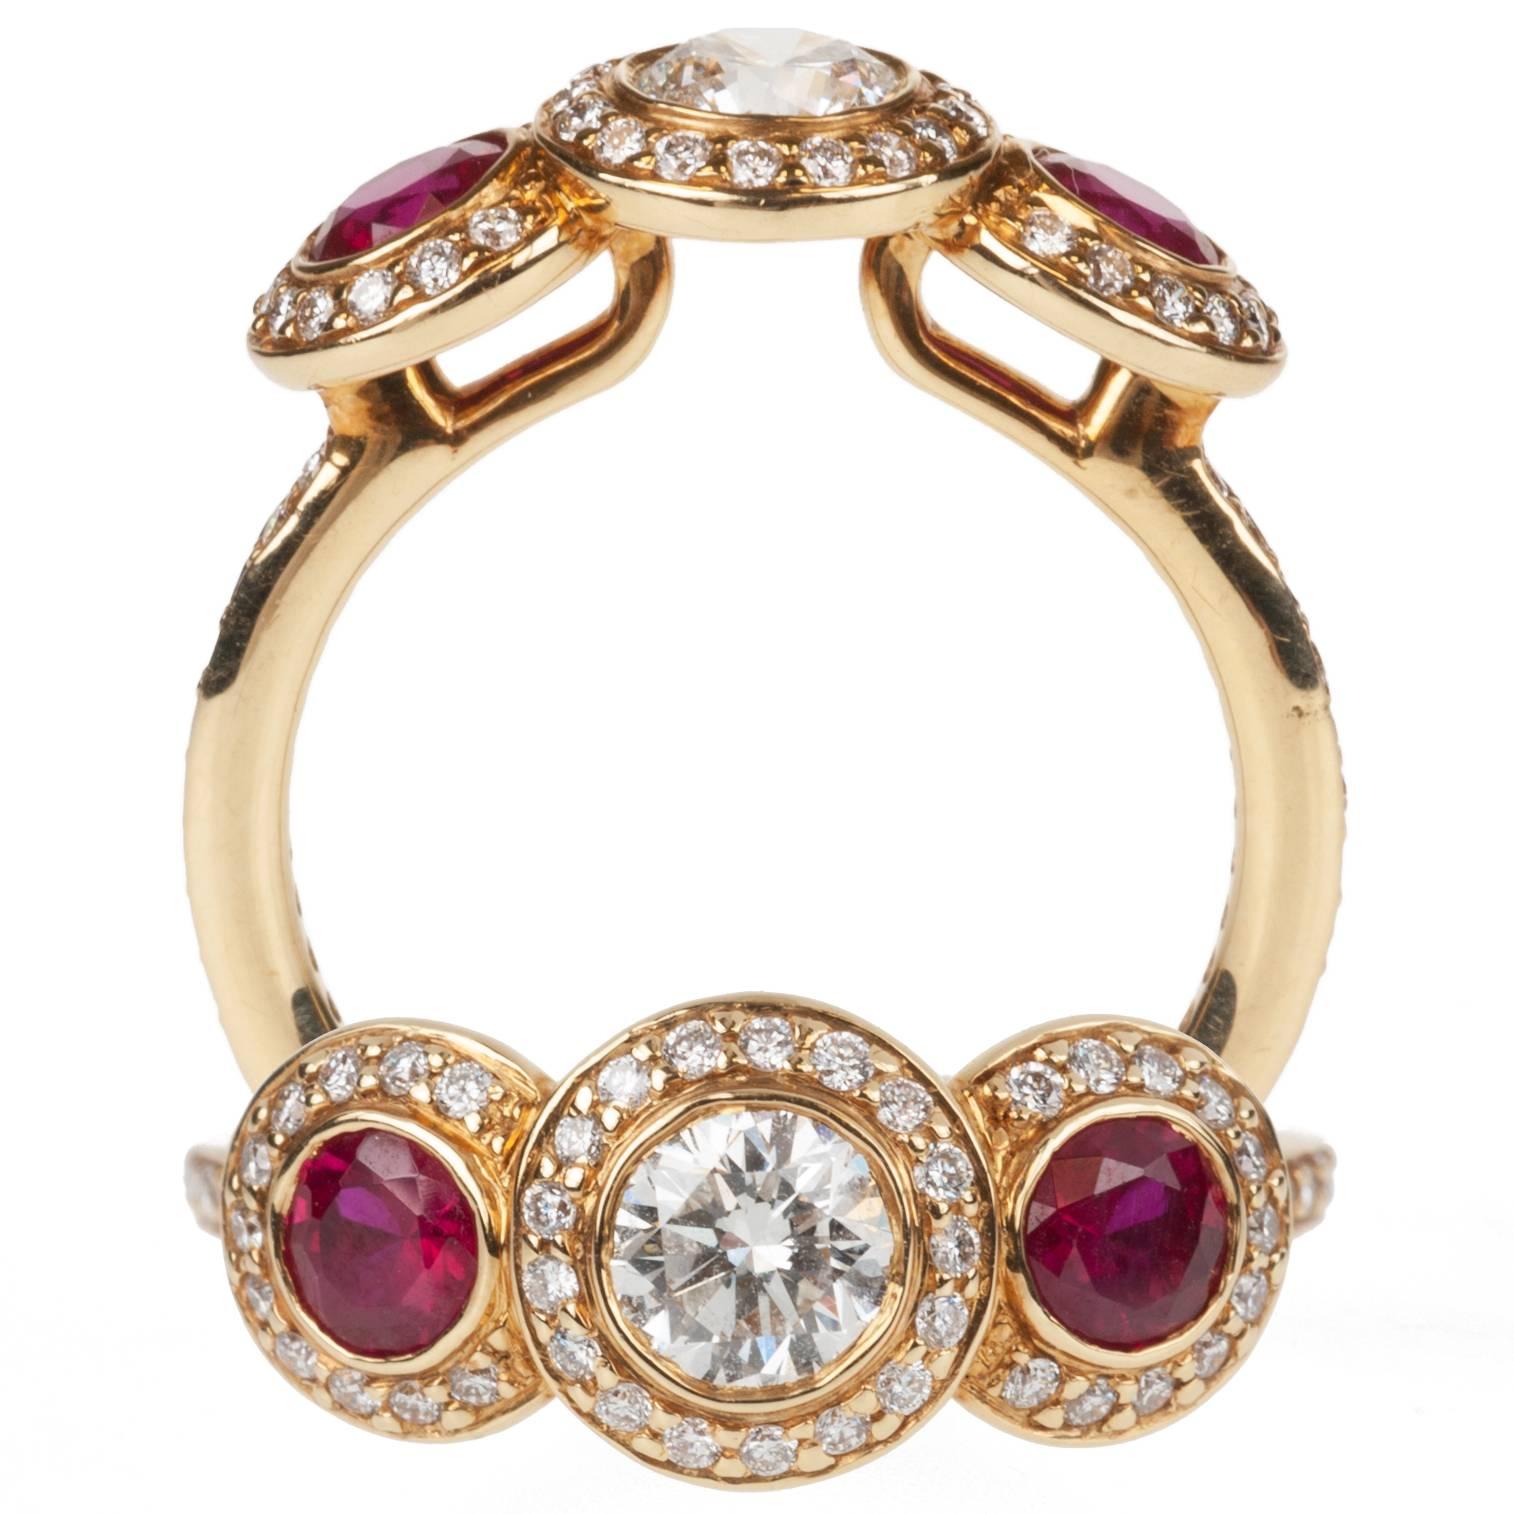 Two round rubies, .64ctw., and a brilliant-cut round diamond, .48ct., are surrounded by pavè-set brilliant-cut round diamonds, .32ctw. in this Ritani ring. The 18-karat yellow gold highlights and emphasizes the gemstones. Size 6.
